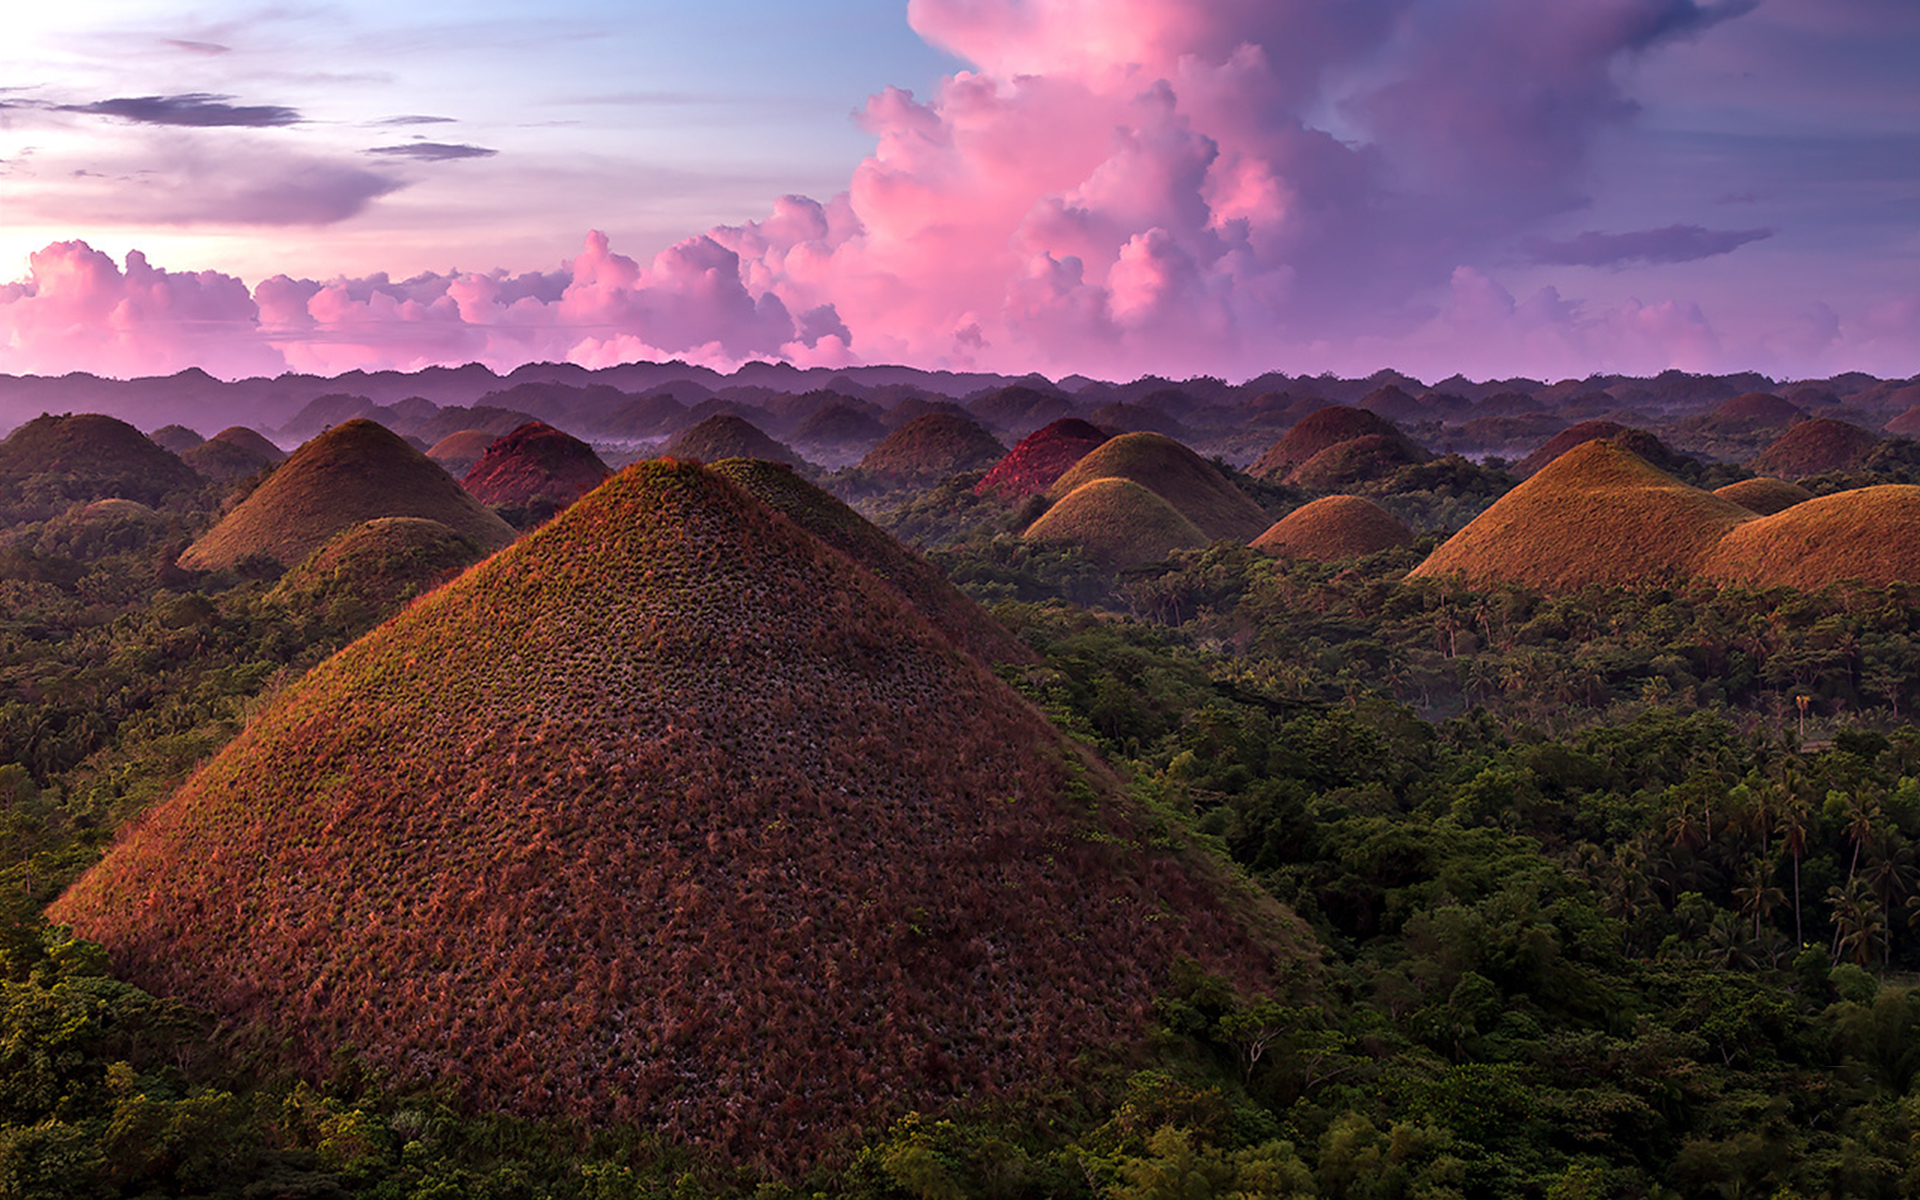 The Chocolate Hills in the Philippines